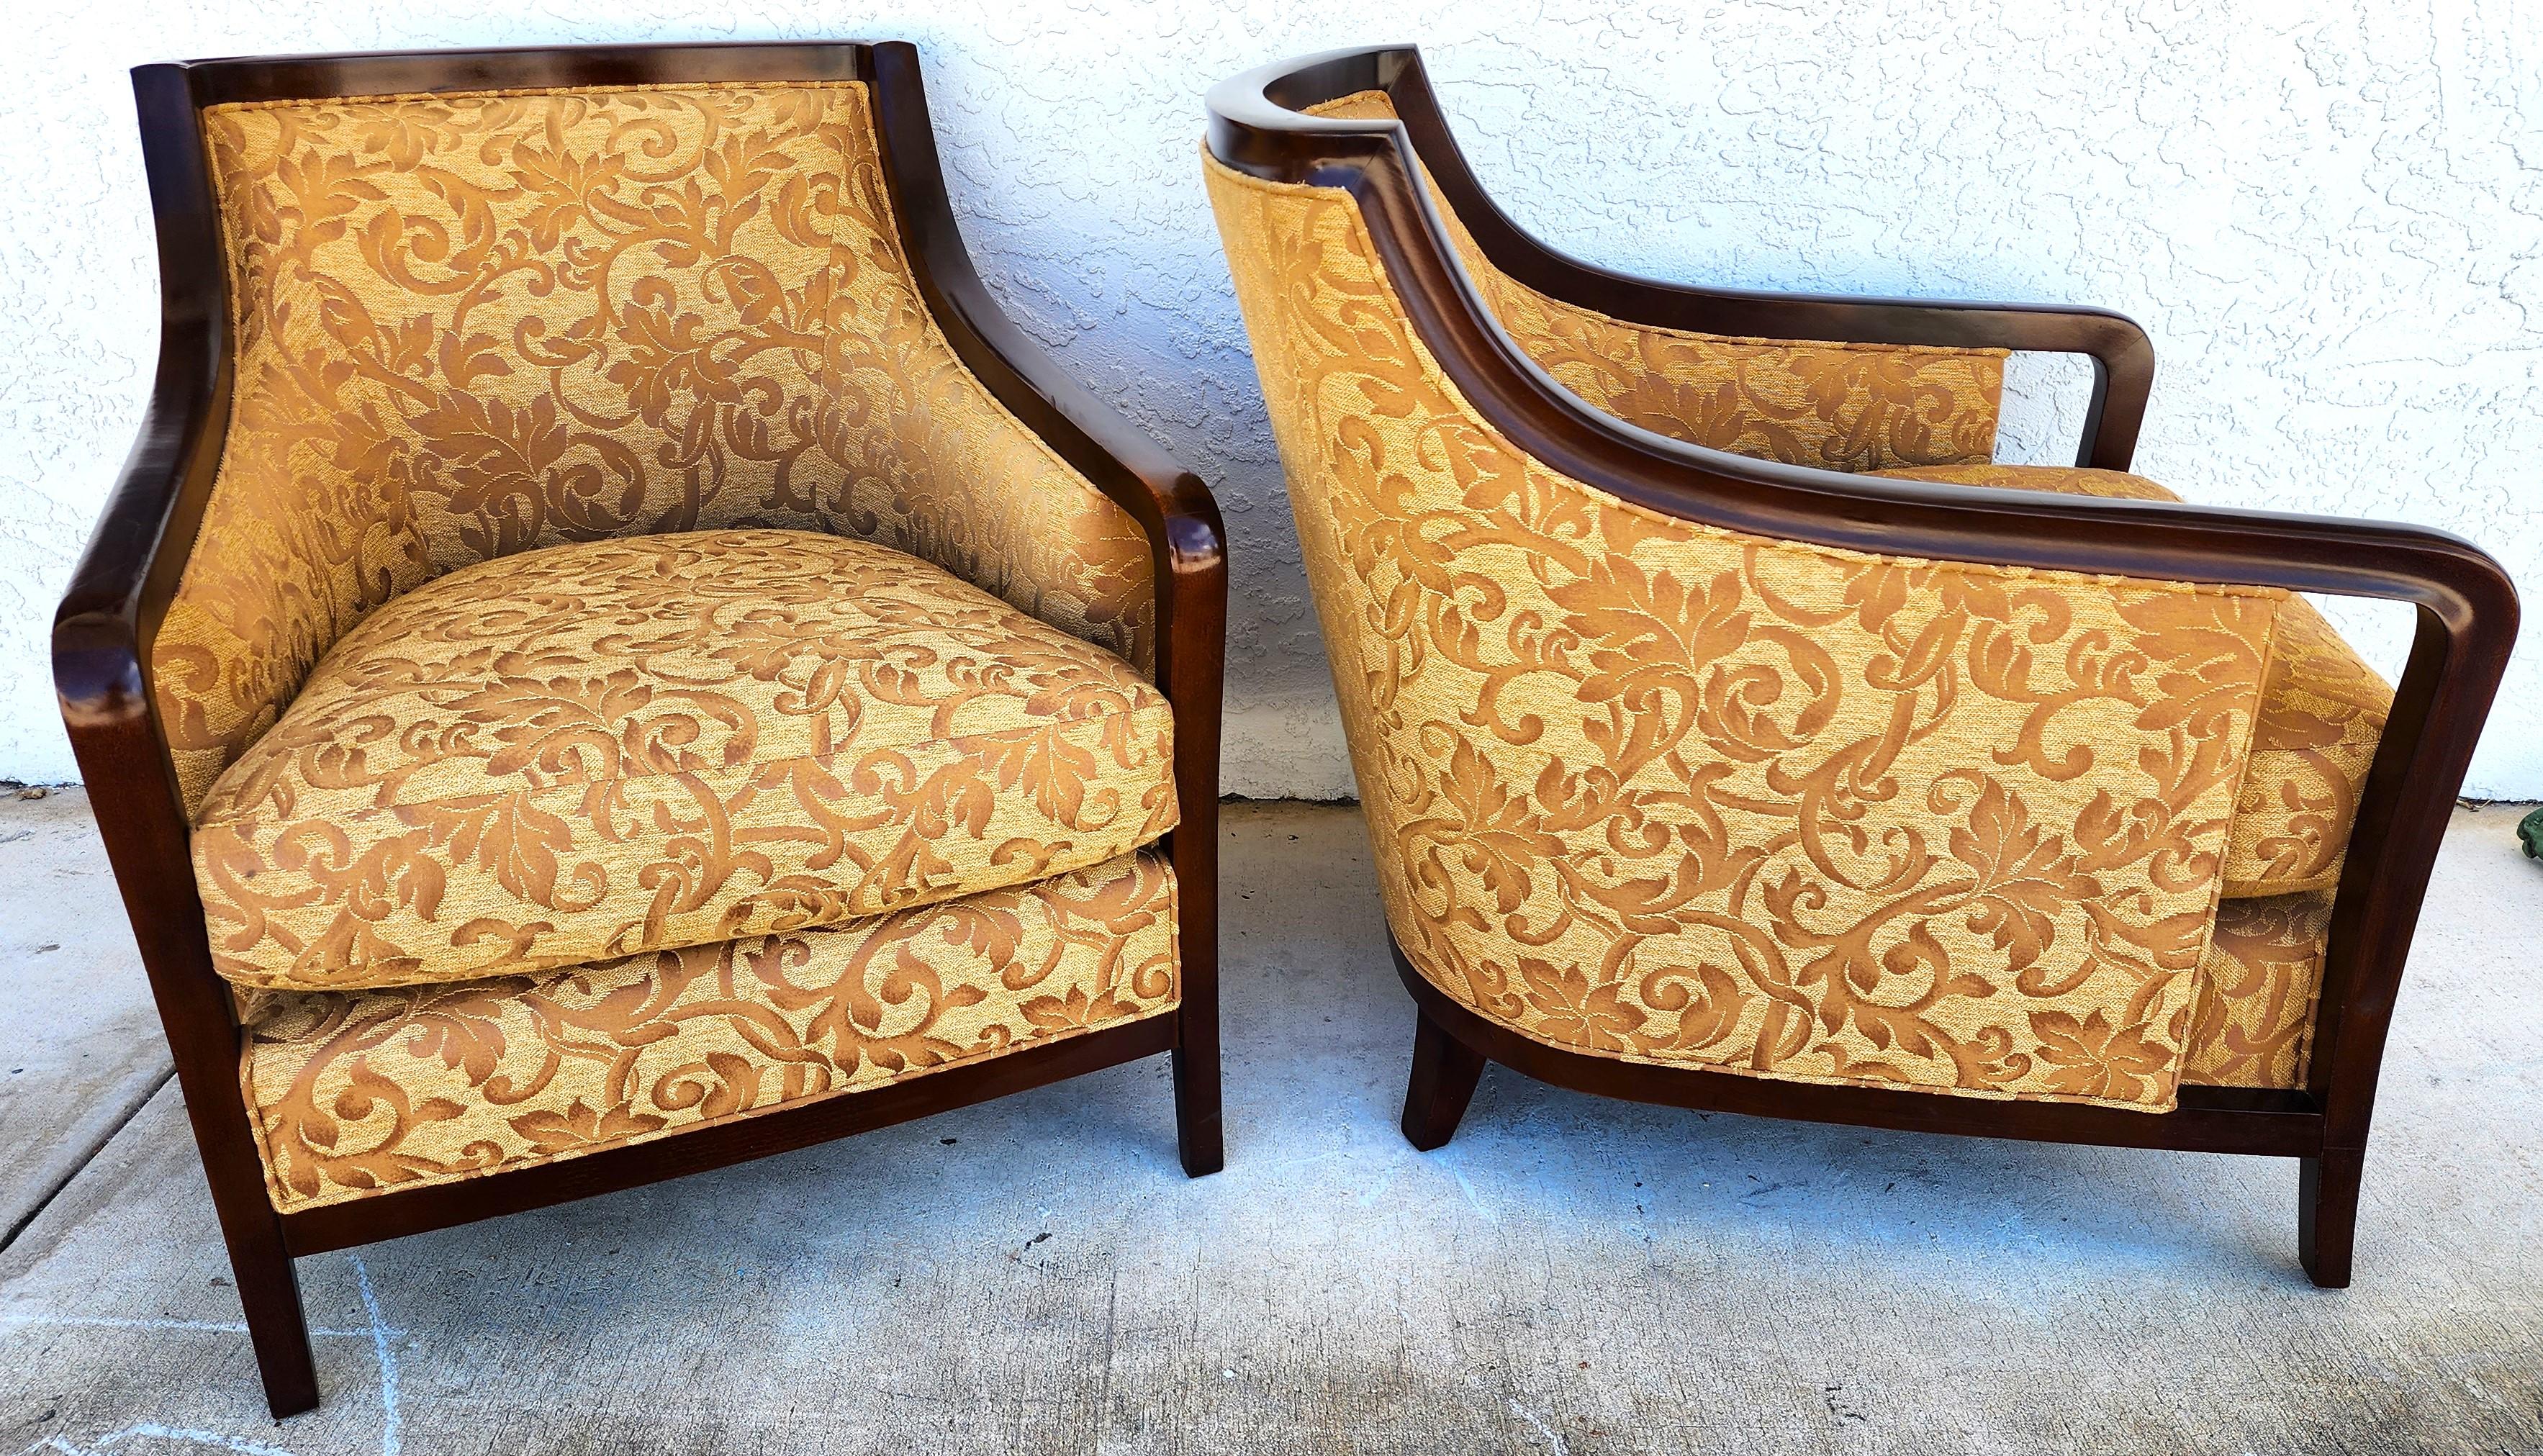 For FULL item description click on CONTINUE READING at the bottom of this page.

Offering One Of Our Recent Palm Beach Estate Fine Furniture Acquisitions Of A
Pair of Barbara Barry for Baker Salon Club Chairs

The arms have a compound curve leading